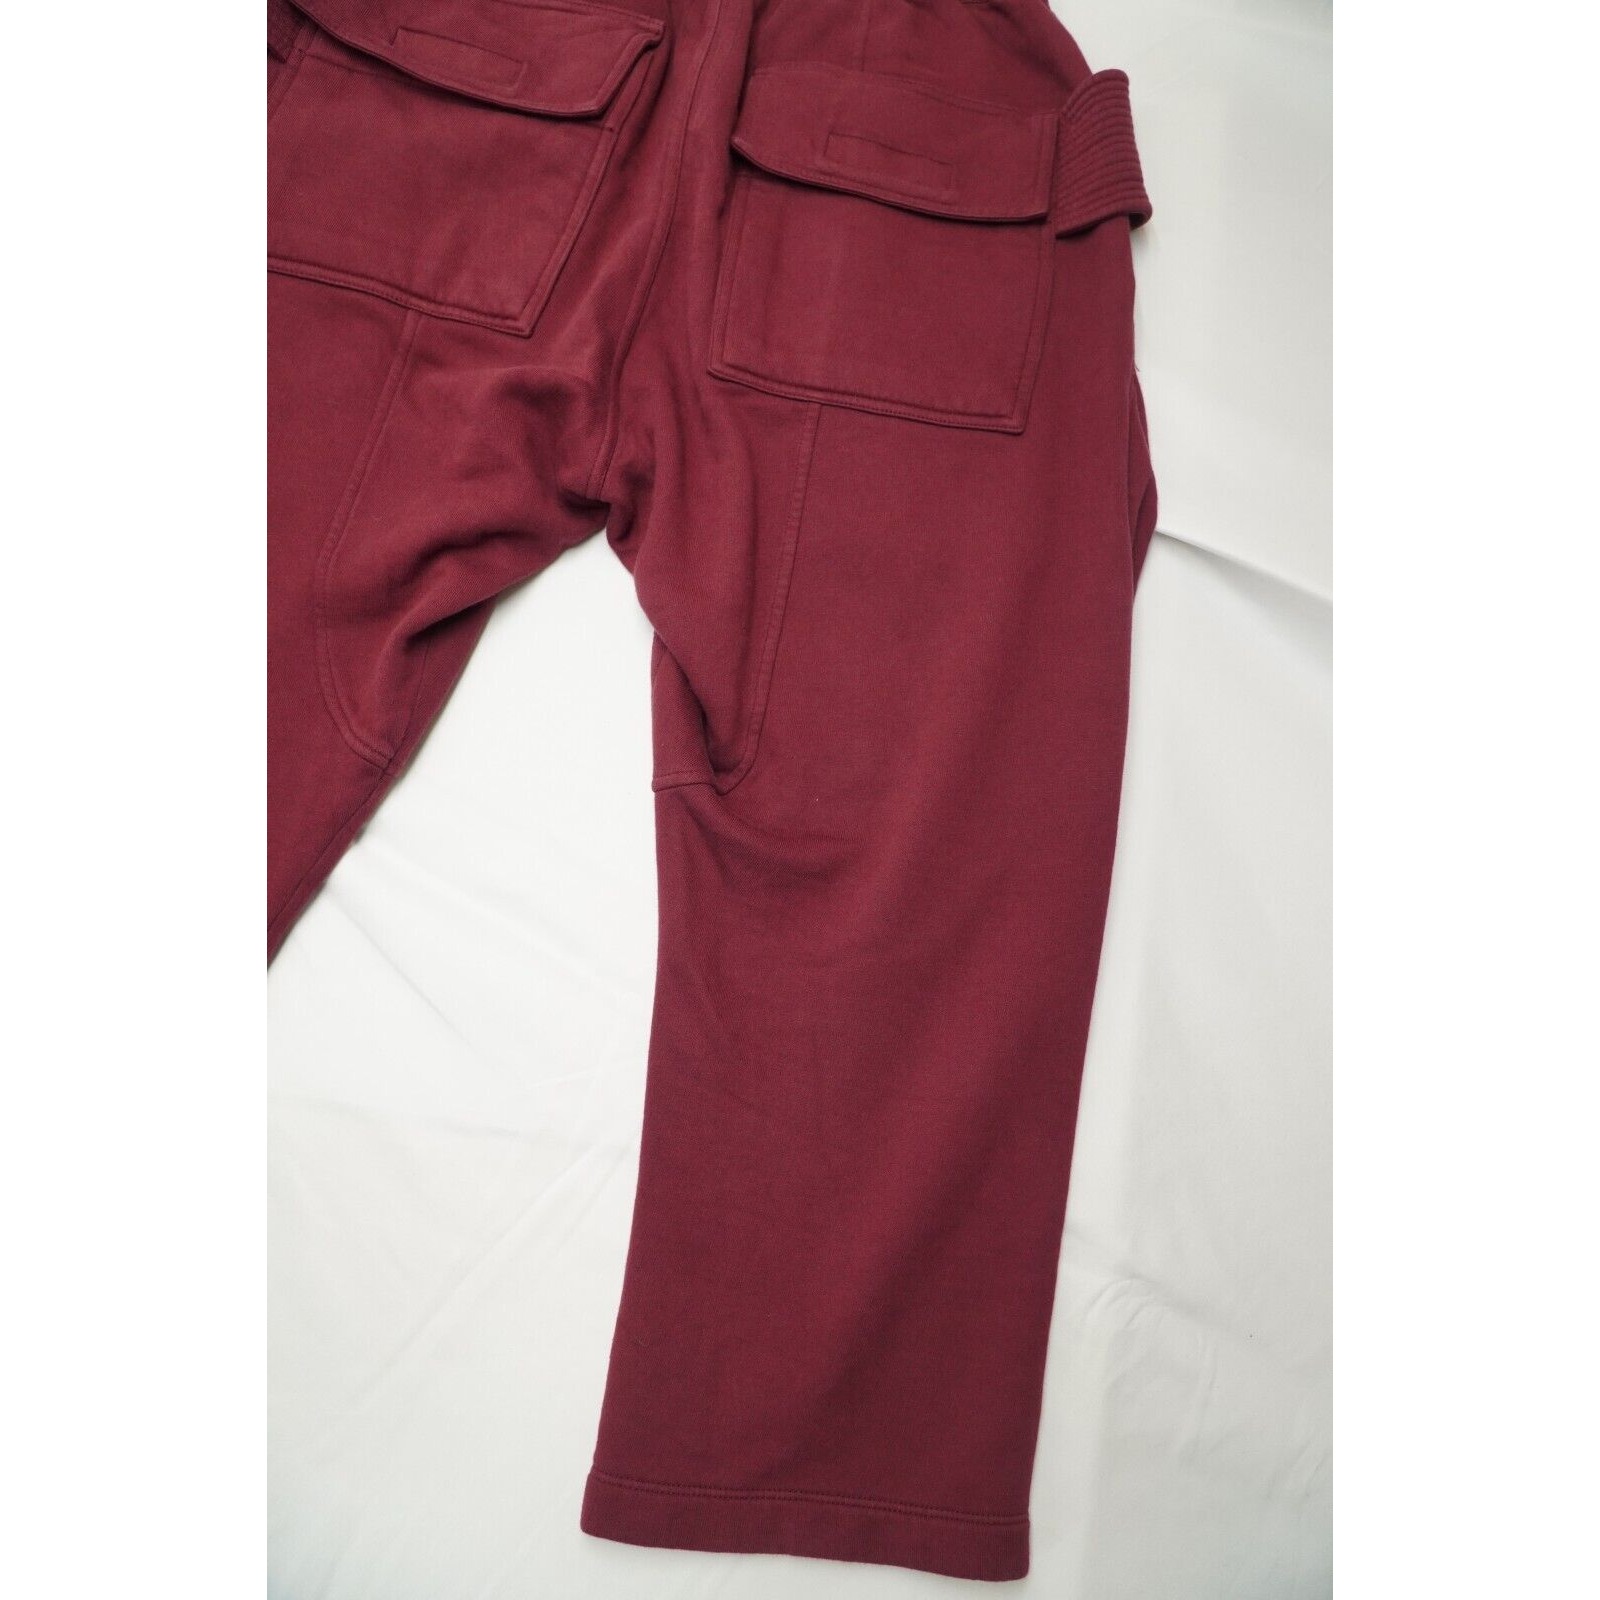 Rick Creatch Cargo Cropped Sweatpant Bruise Red FW20 - 13